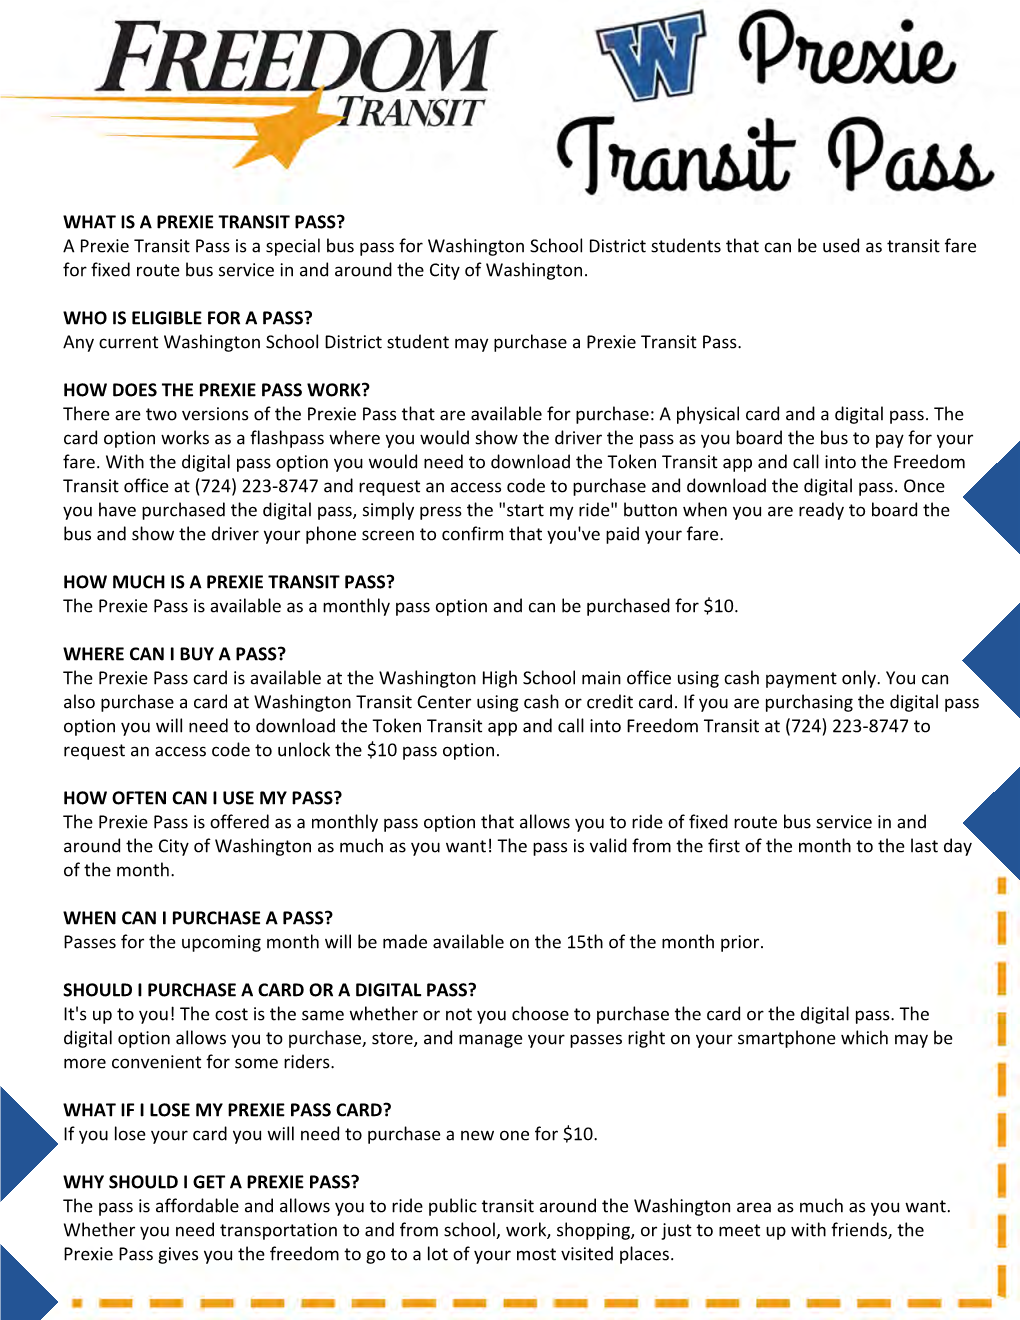 What Is a Prexie Transit Pass?